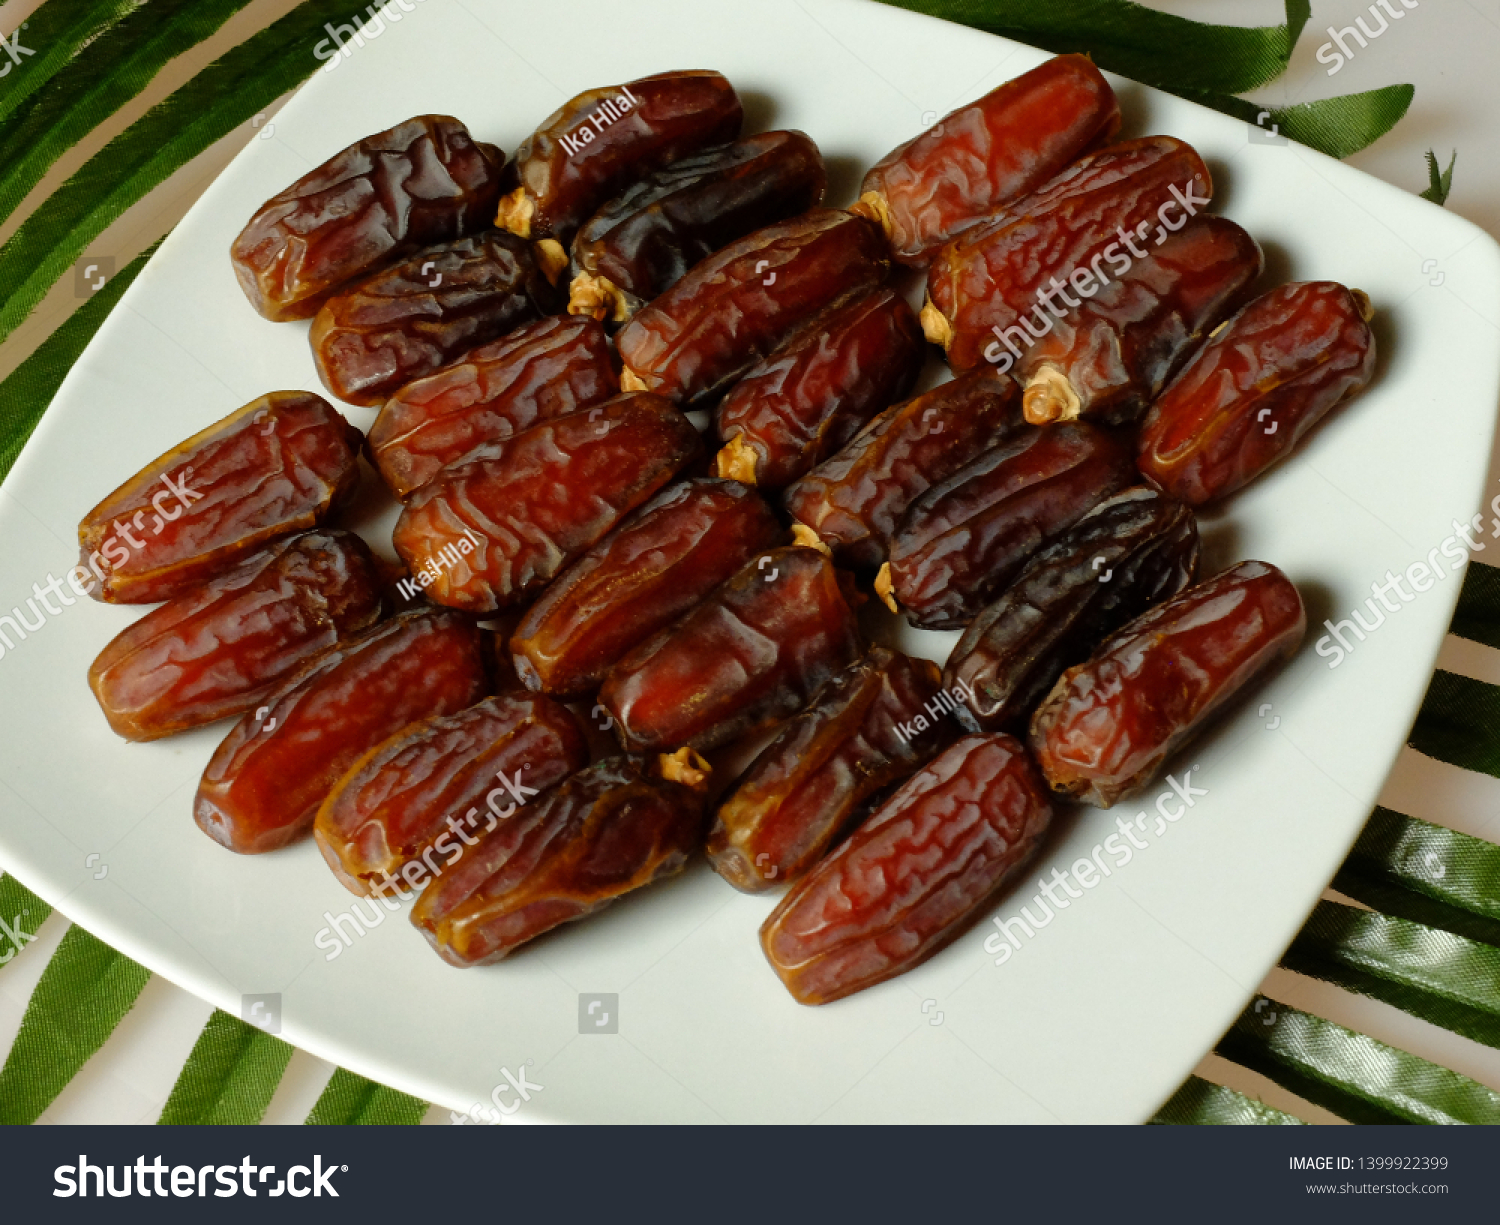 Mabroom dates fruit. dates fruit consumed by Muslims throughout the world when breaking fast during the month of Ramadan. Mabroom dates from the city of Medina, the Kingdom of Saudi Arabia. #1399922399